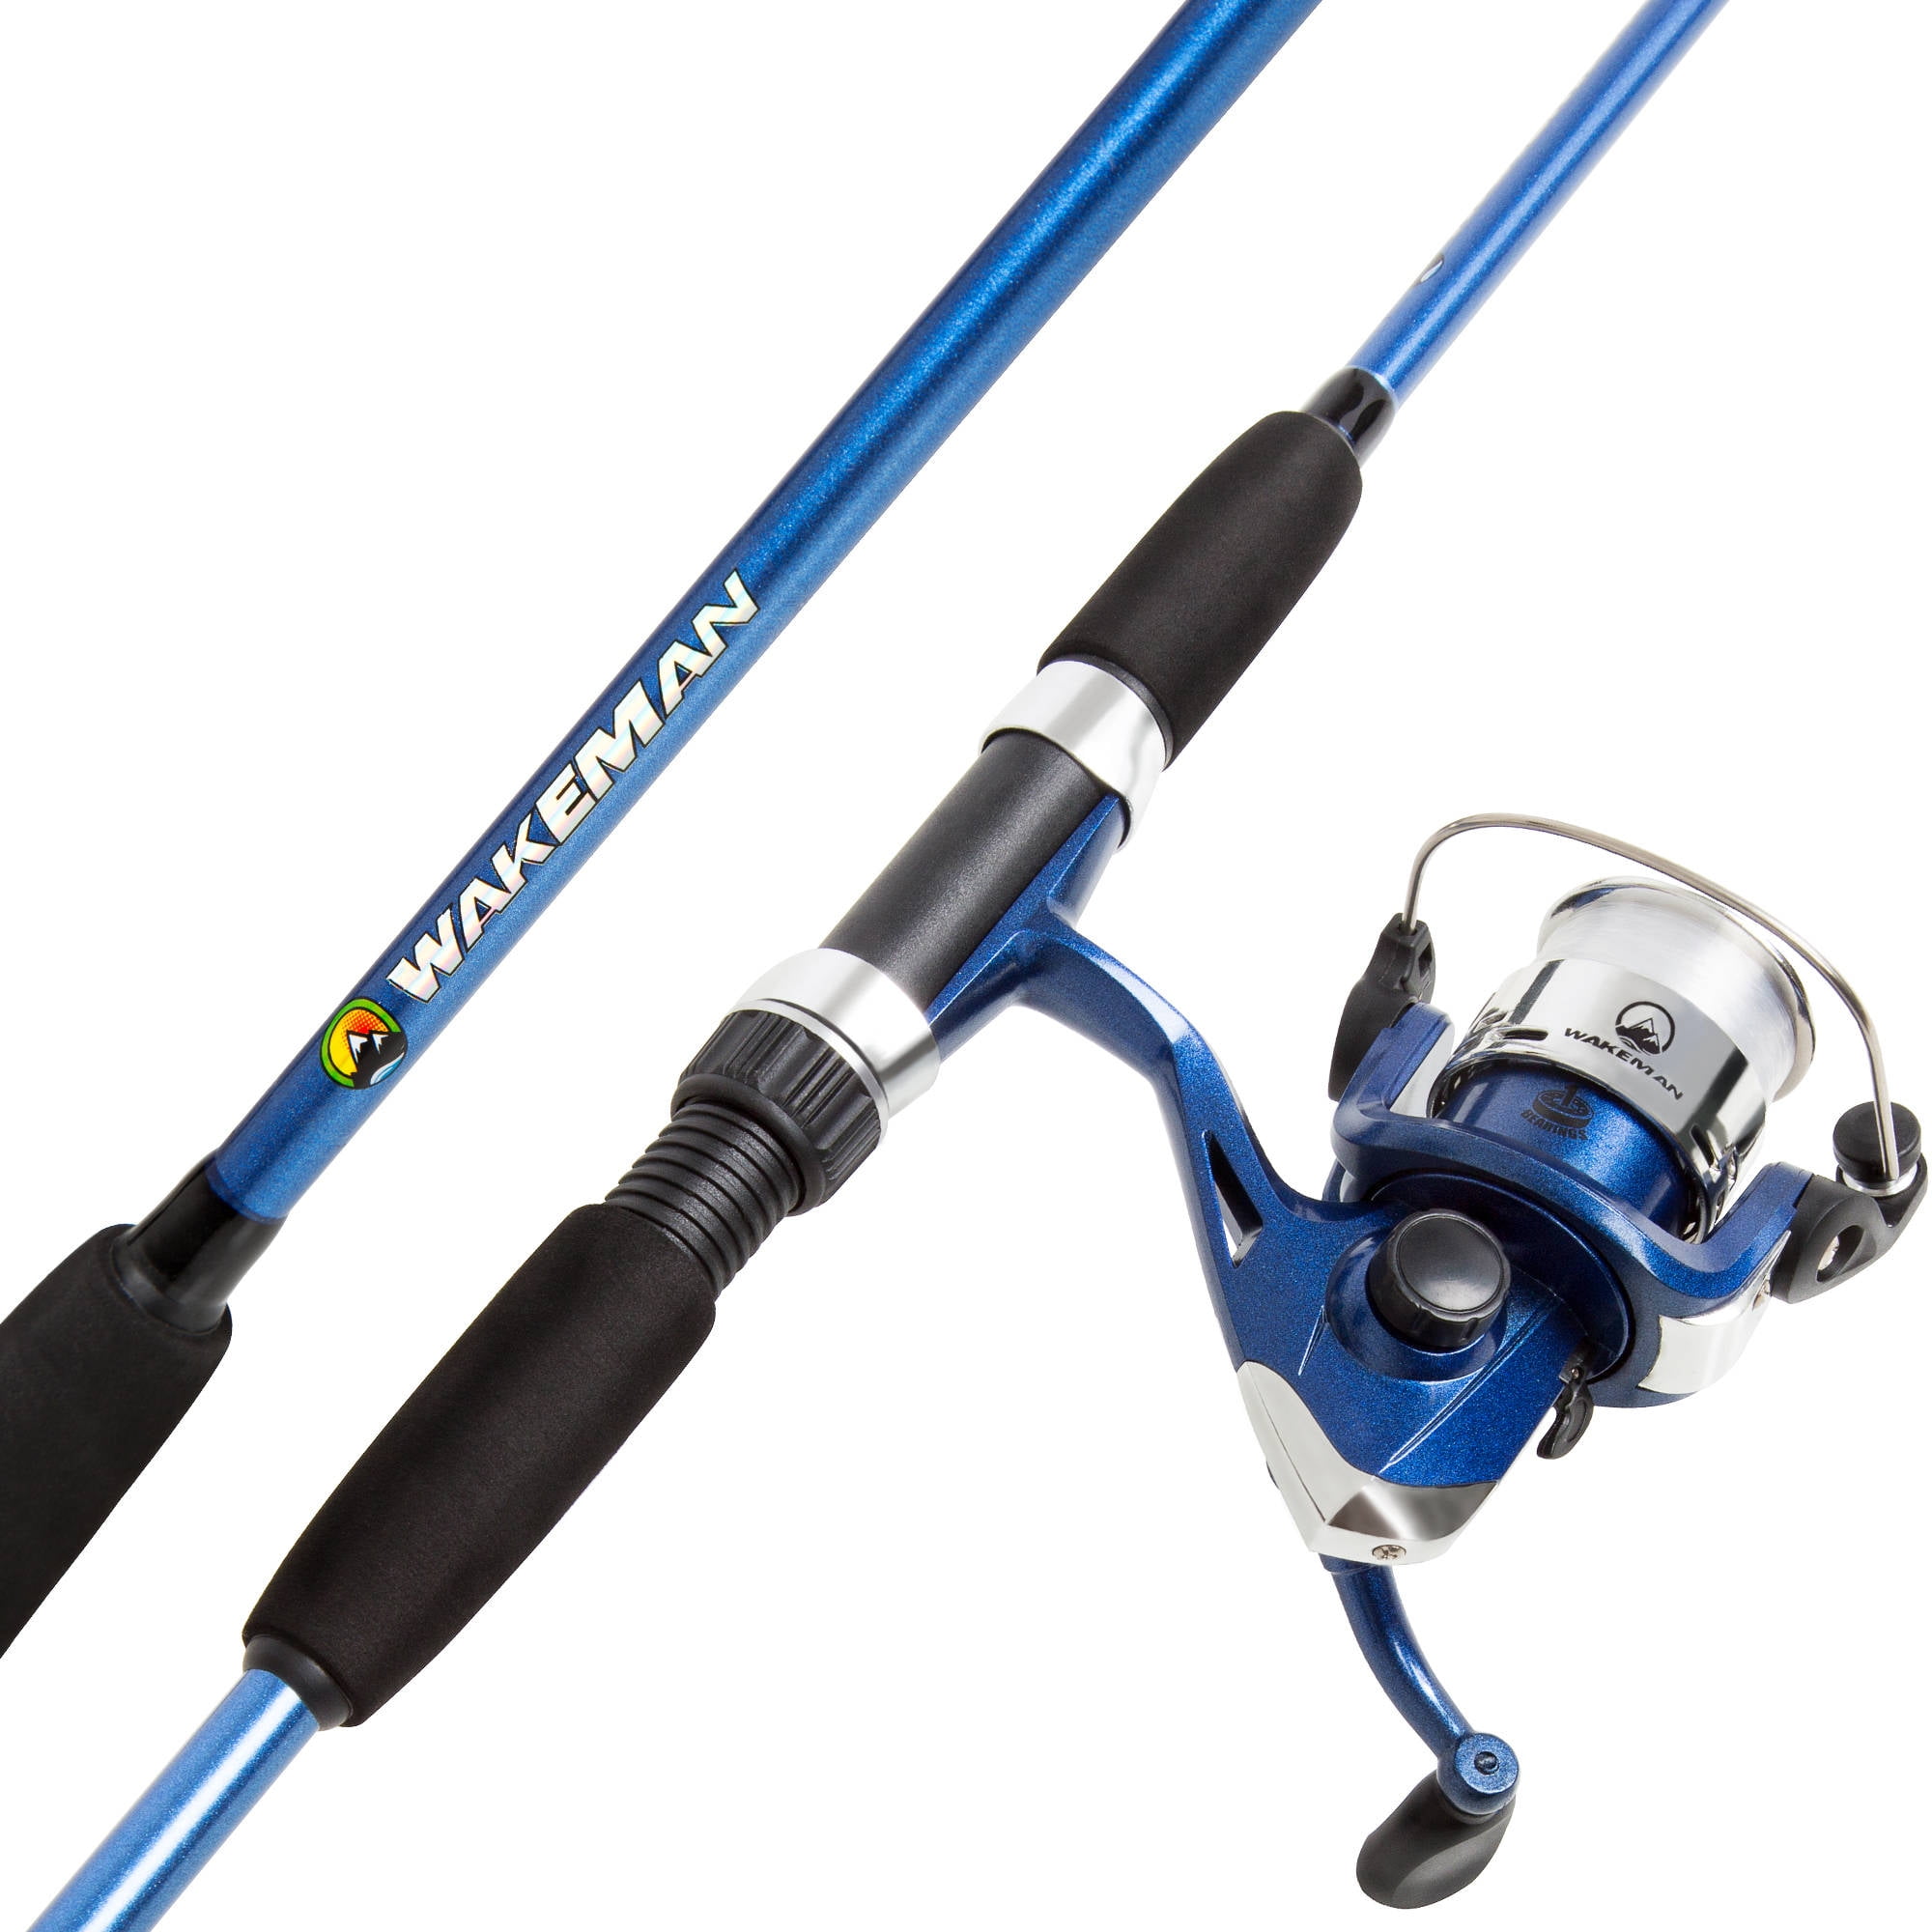 What are some advantages to buying fishing tackle in bulk?